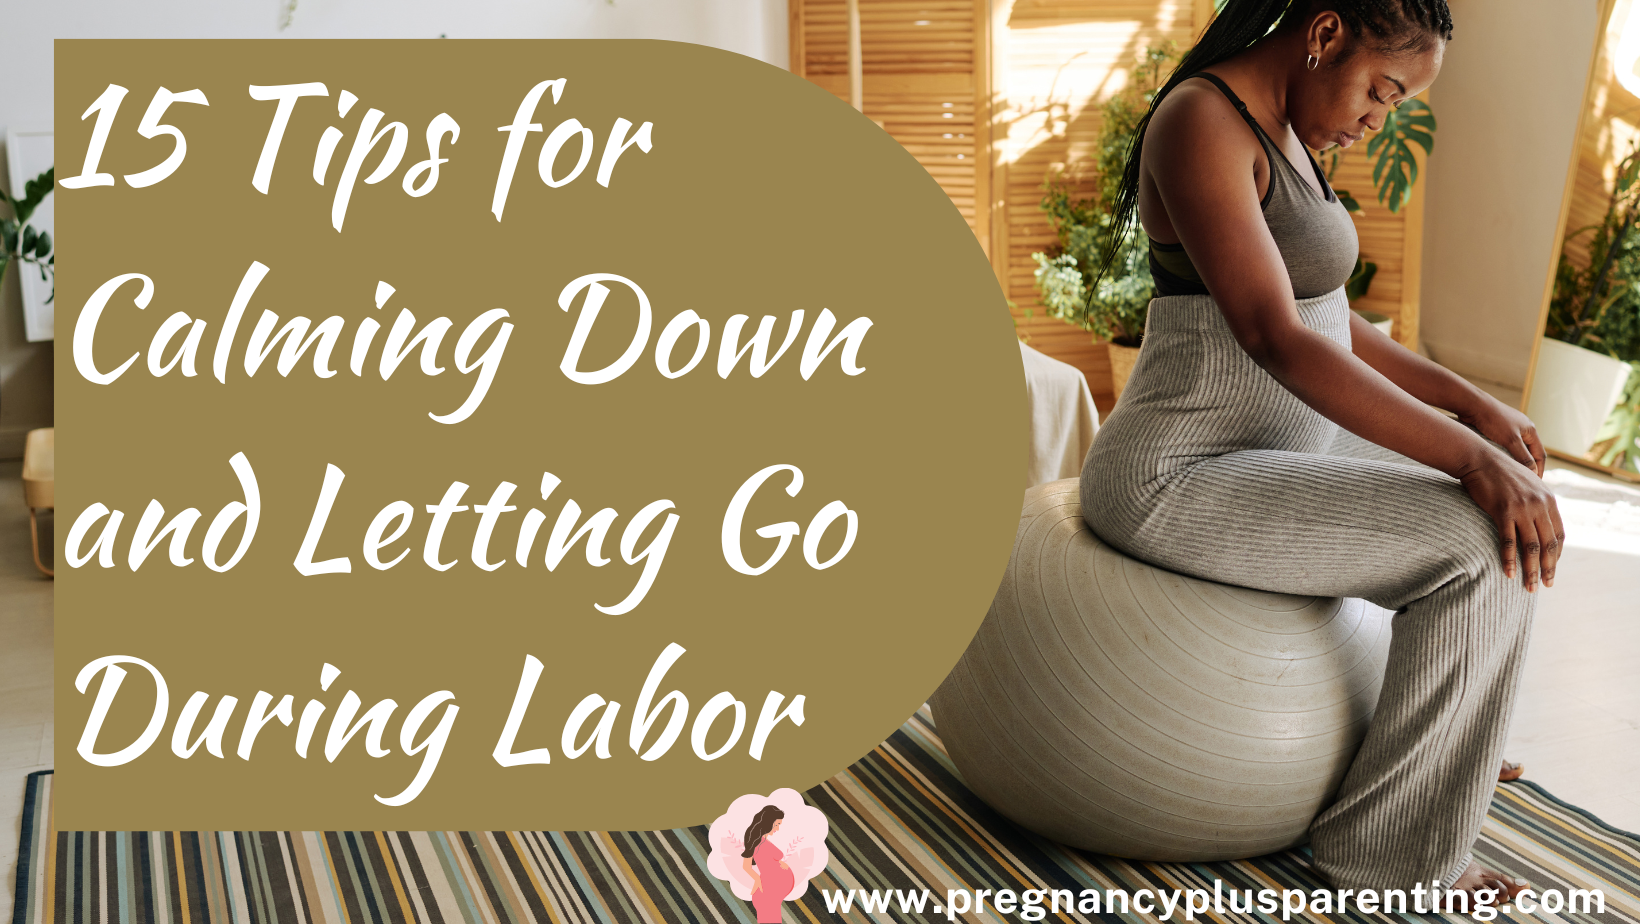 Finding Tranquility: 15 Tips for Calming Down and Letting Go During Labor